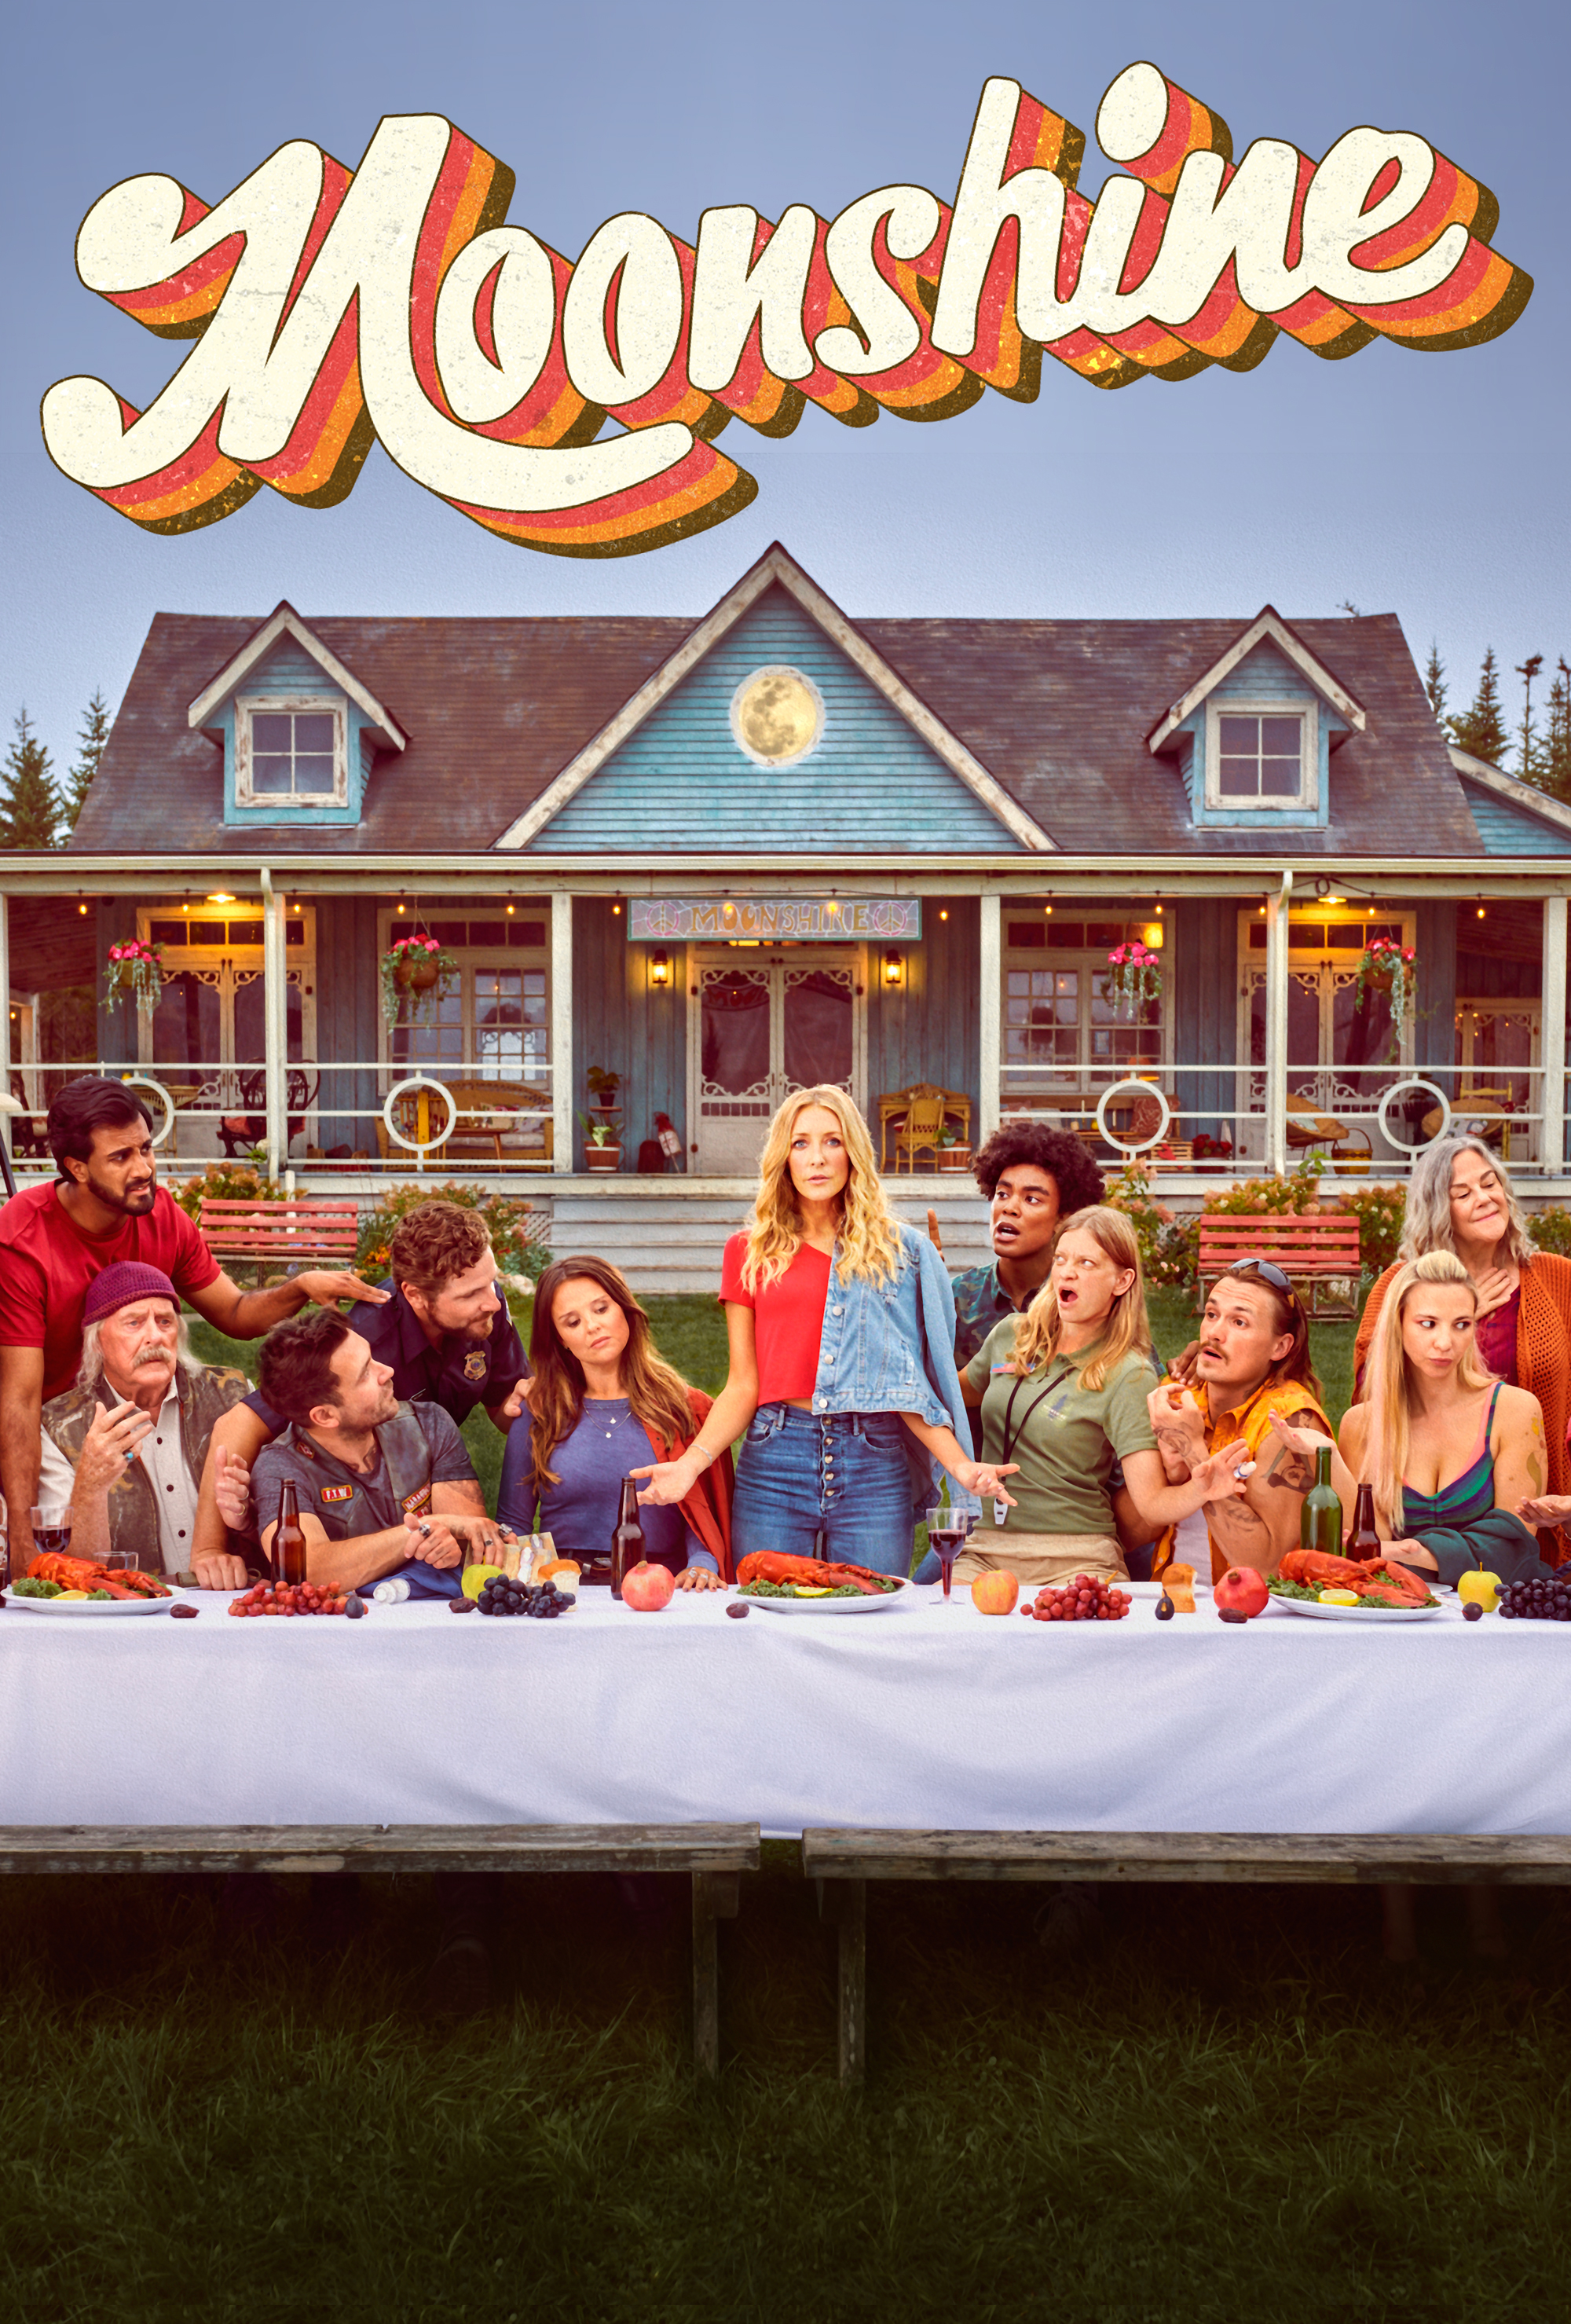 Bright coloured poster with text reading "Moonshine" above a blue house with a last supper style table with all of the moonshine characters looking shocked.